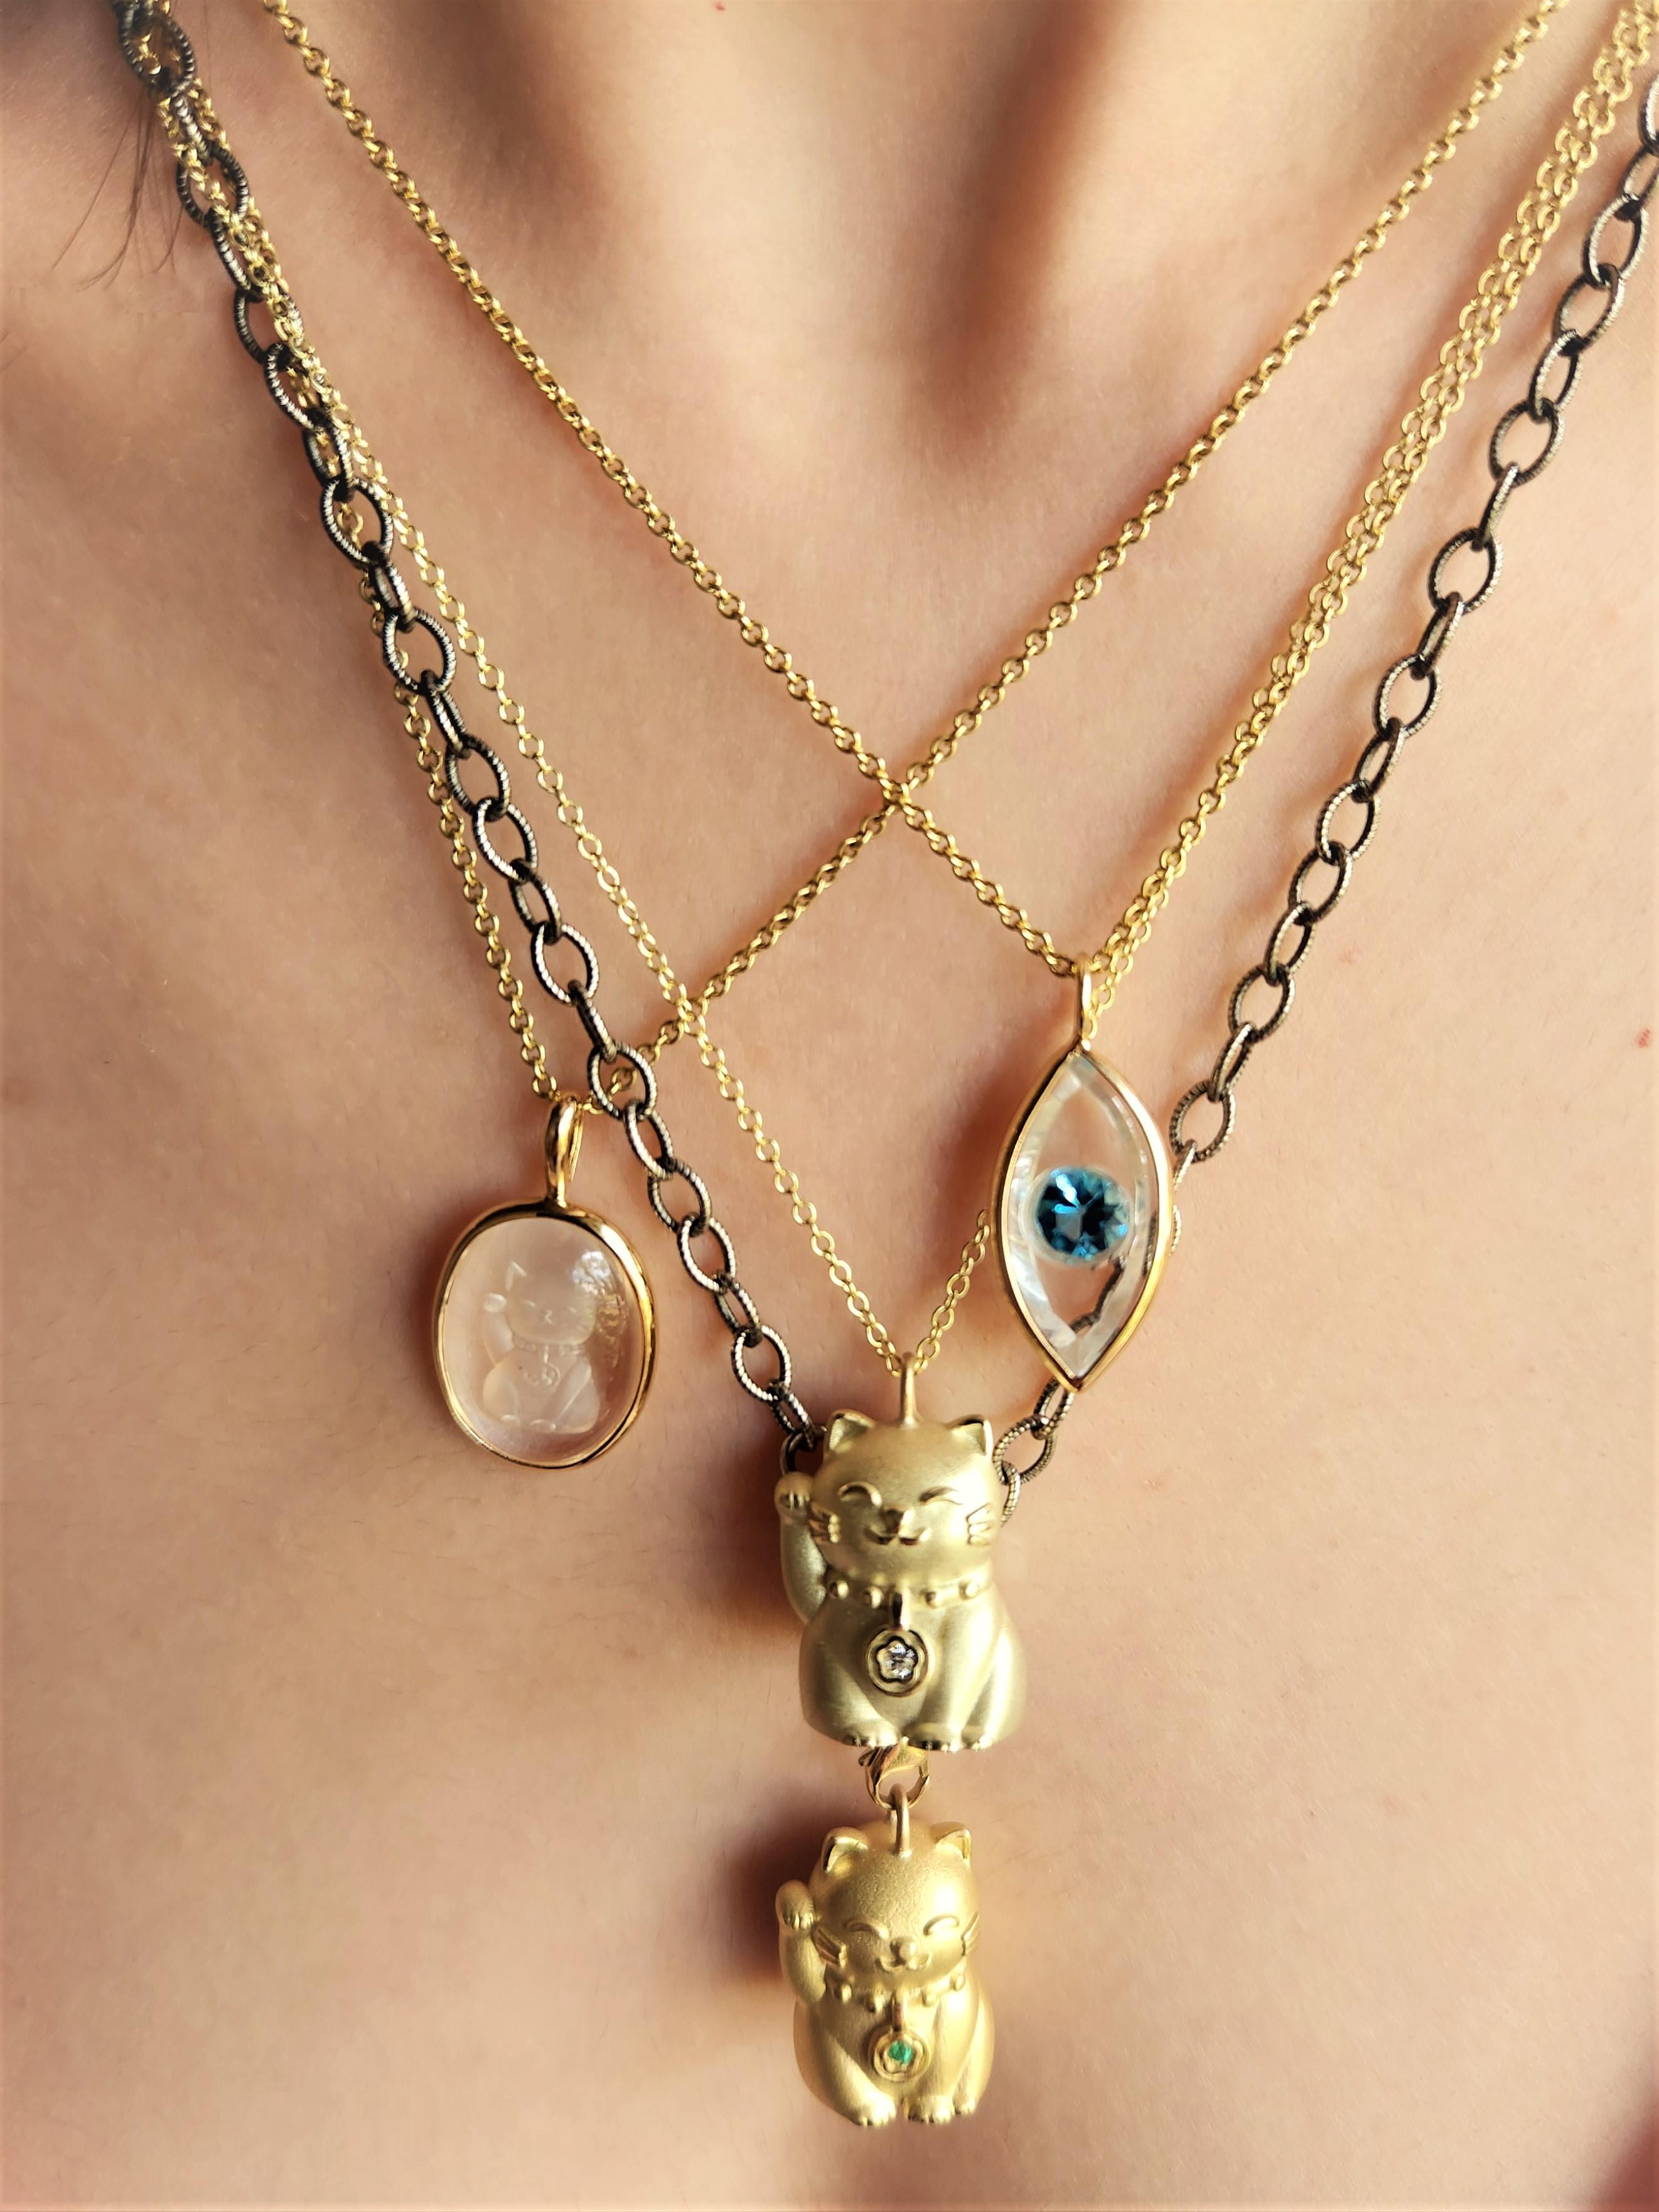 Mixed Cut Protective Evil Eye Necklace in 14K Gold and Quartz with Blue Topaz or Peridot For Sale